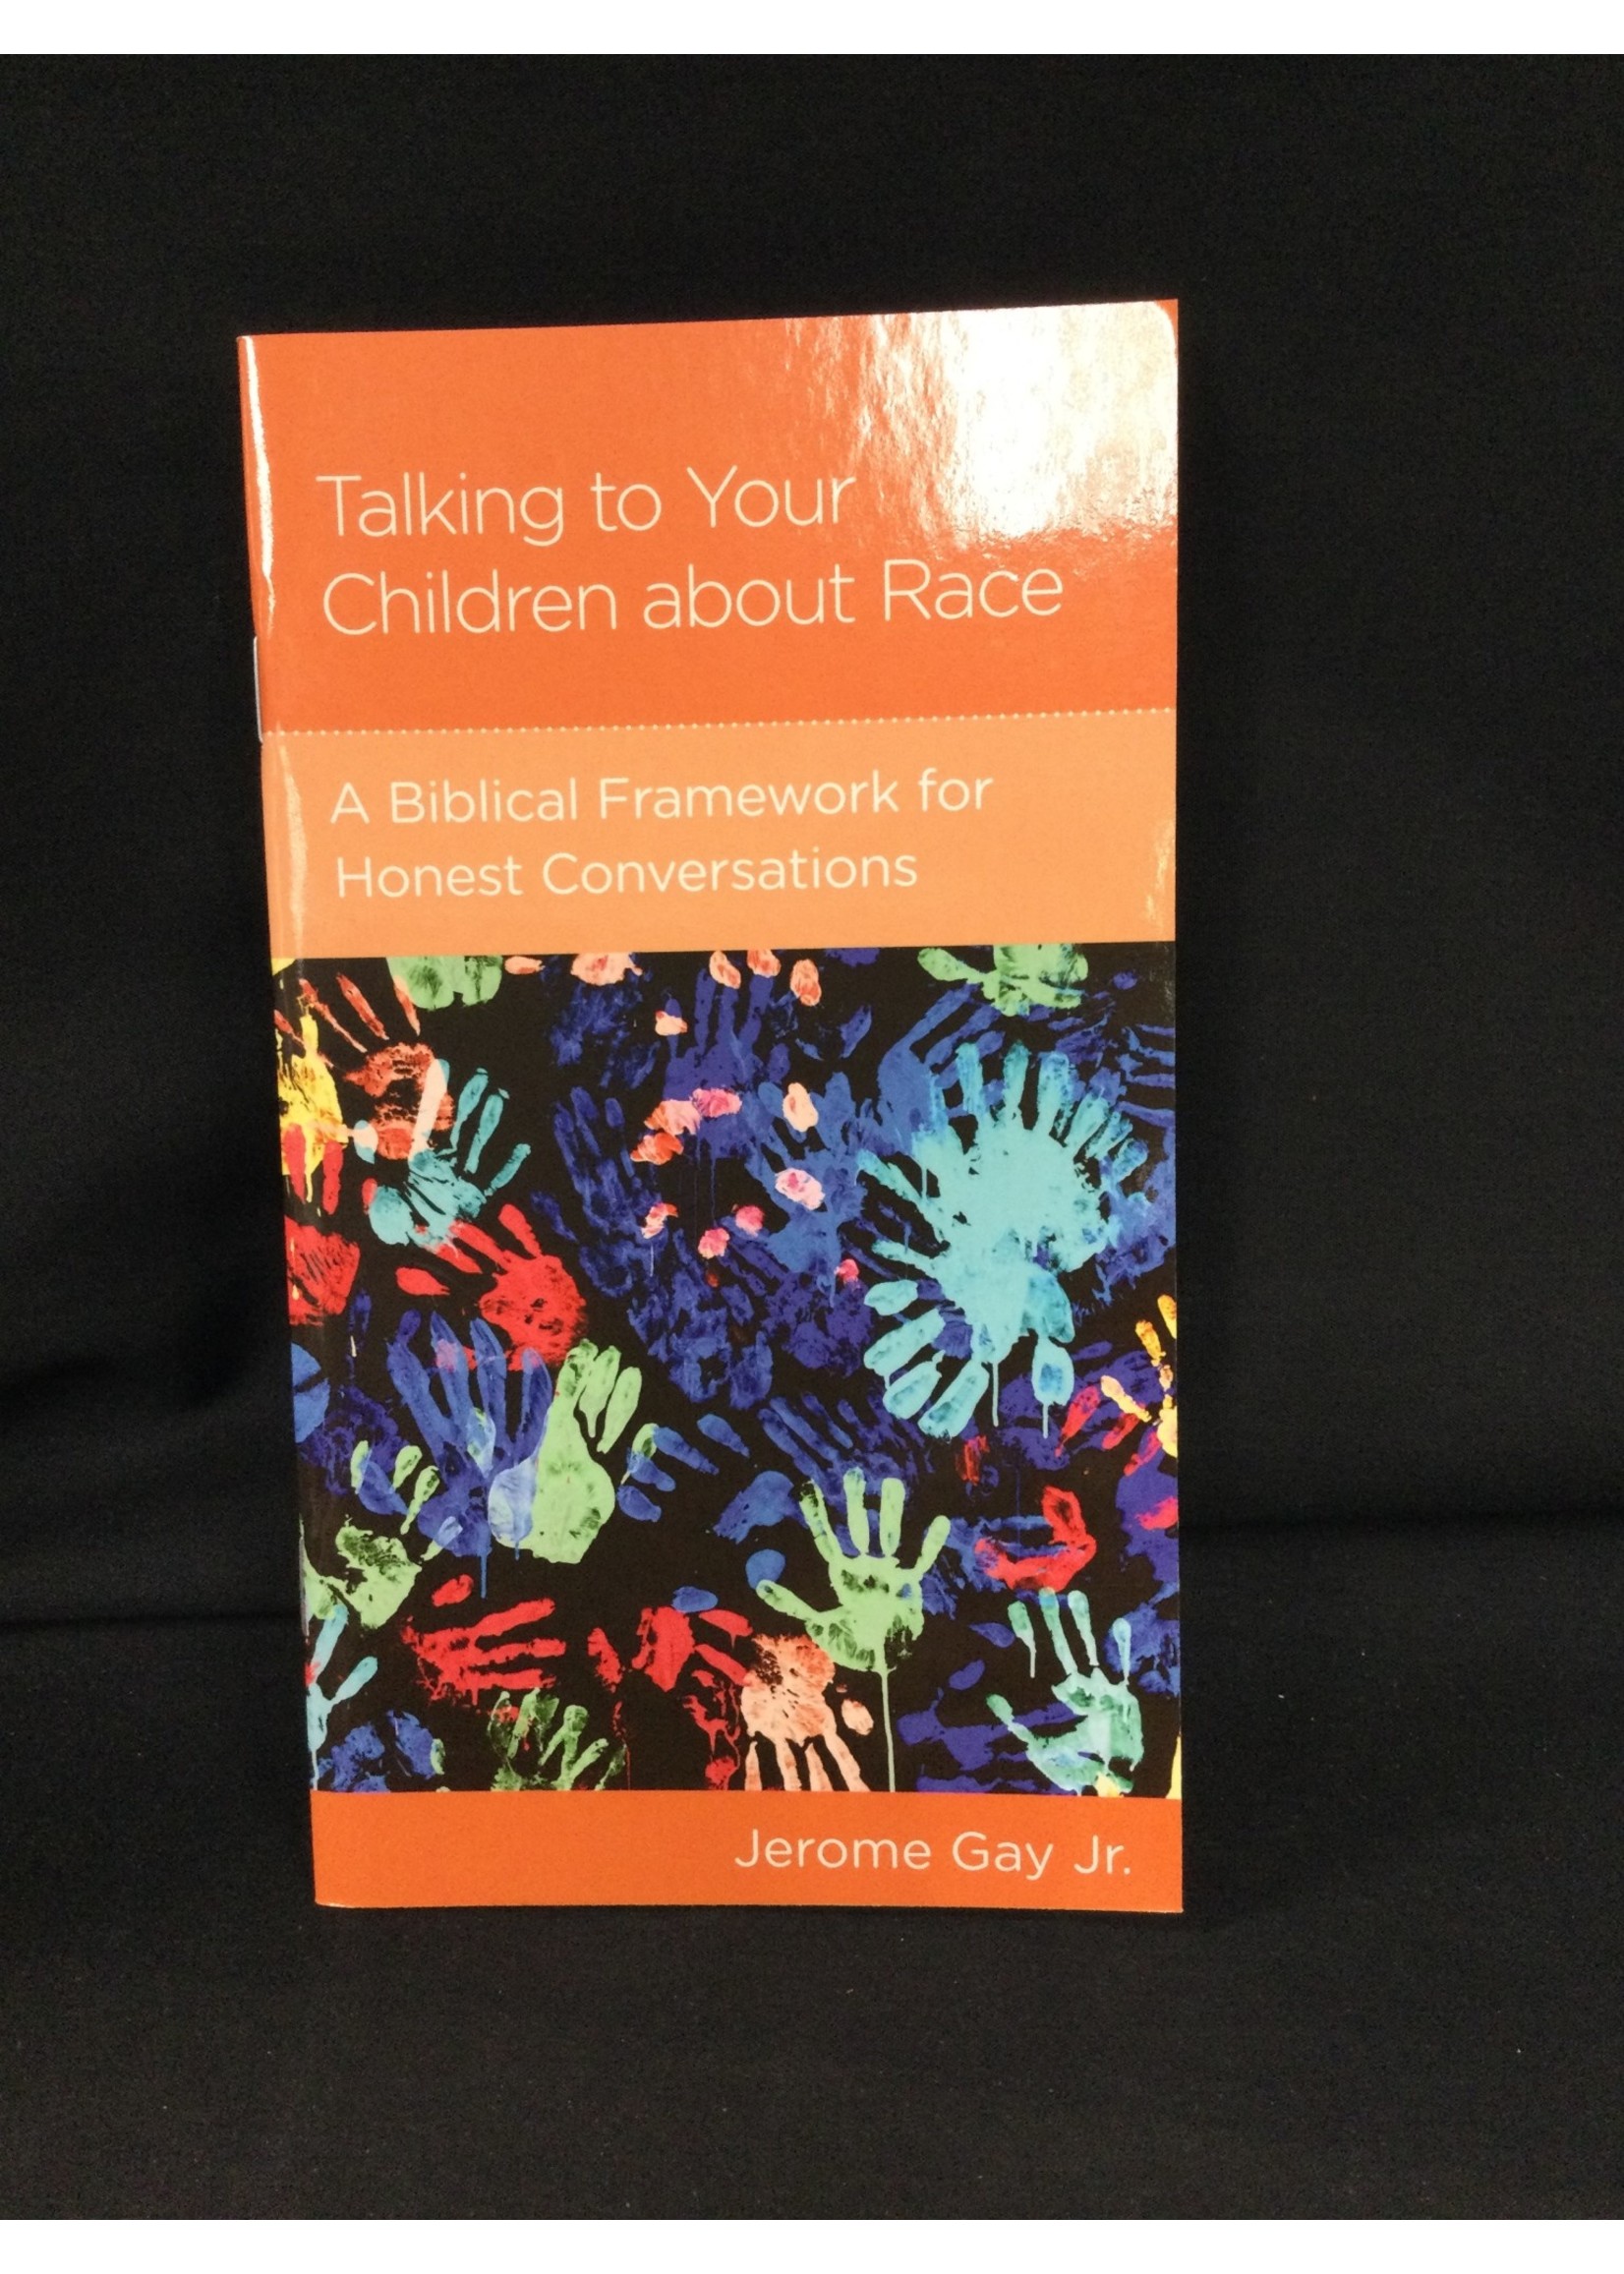 TALKING TO YOUR CHILDREN ABOUT RACE